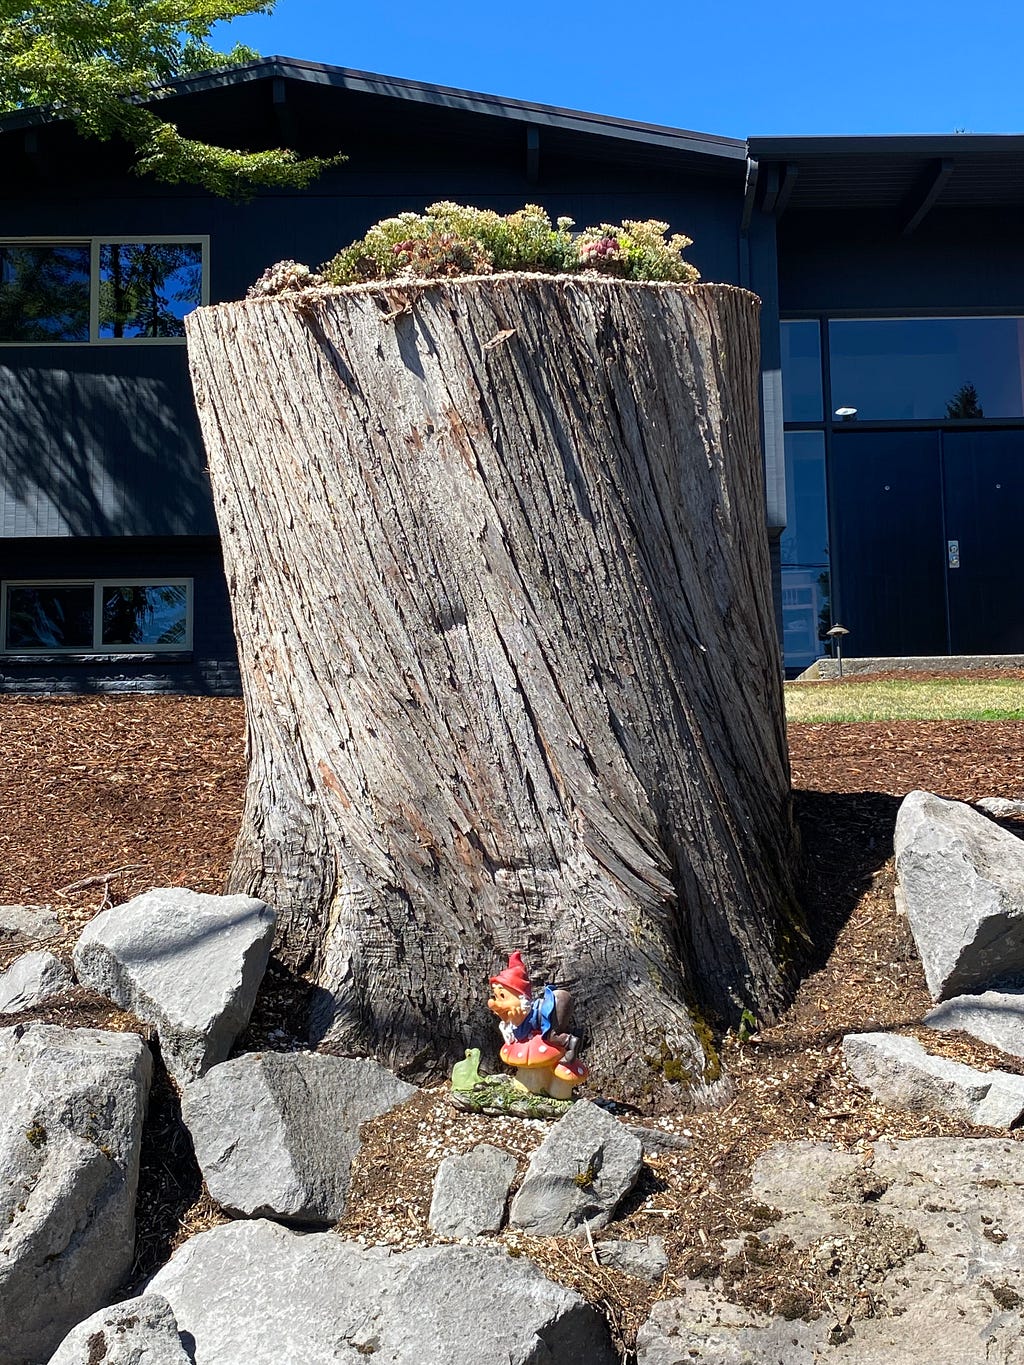 The remains of the tree with the succulent garden on top and a troll village starting around the stump.